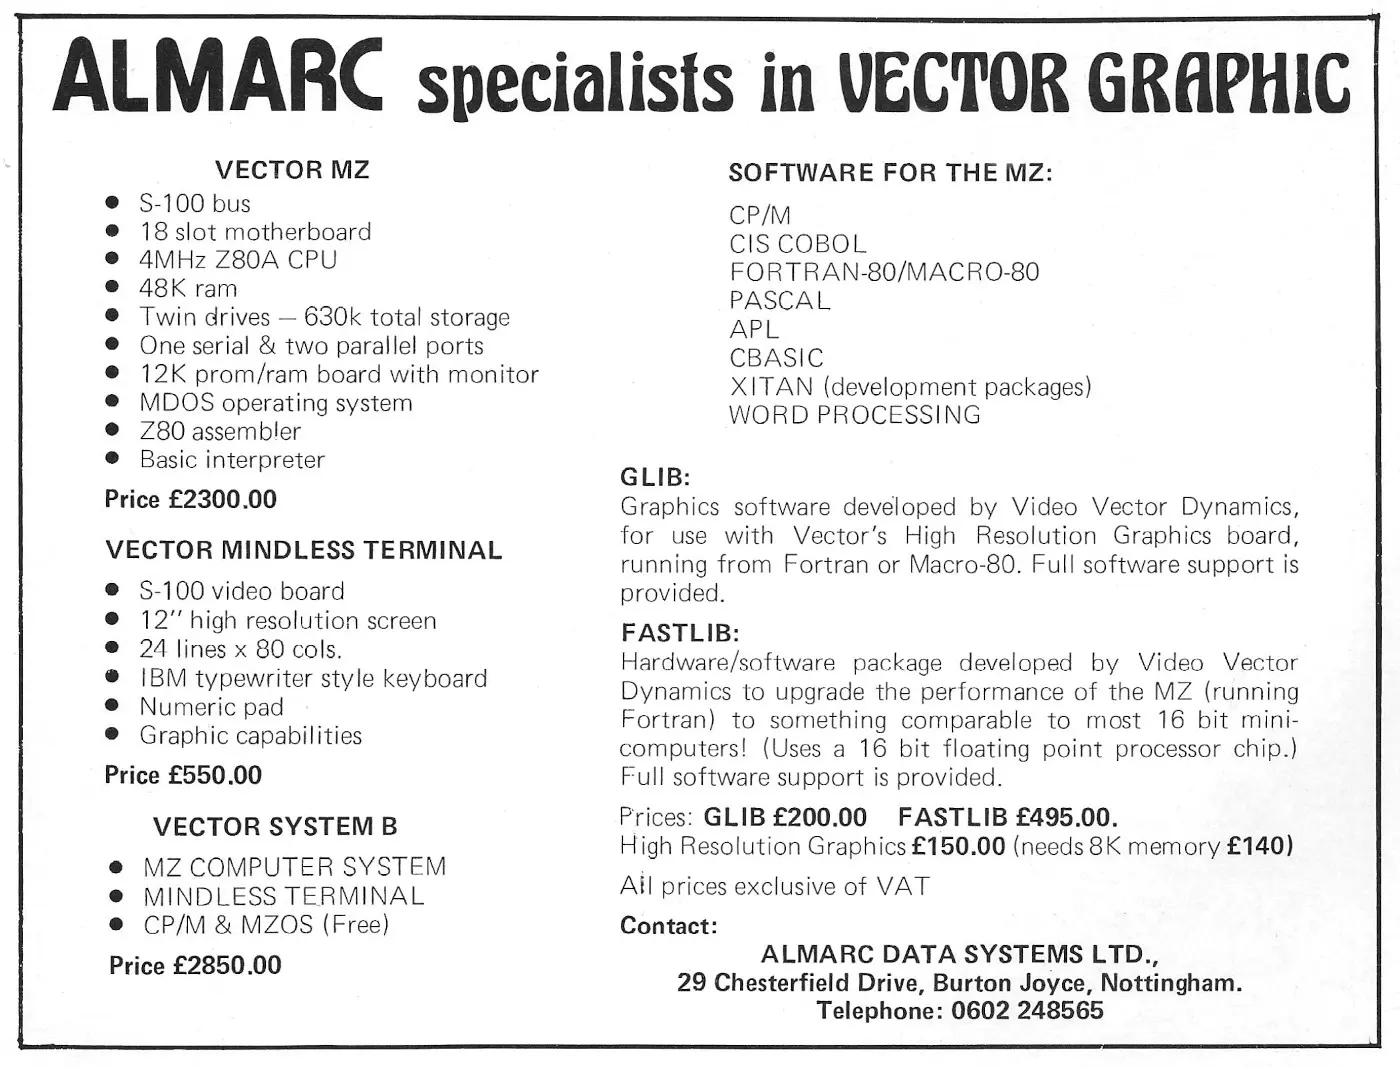 Vector Graphic Advert: Almarc: Specialists in Vector Graphic, from Personal Computer World, August 1979